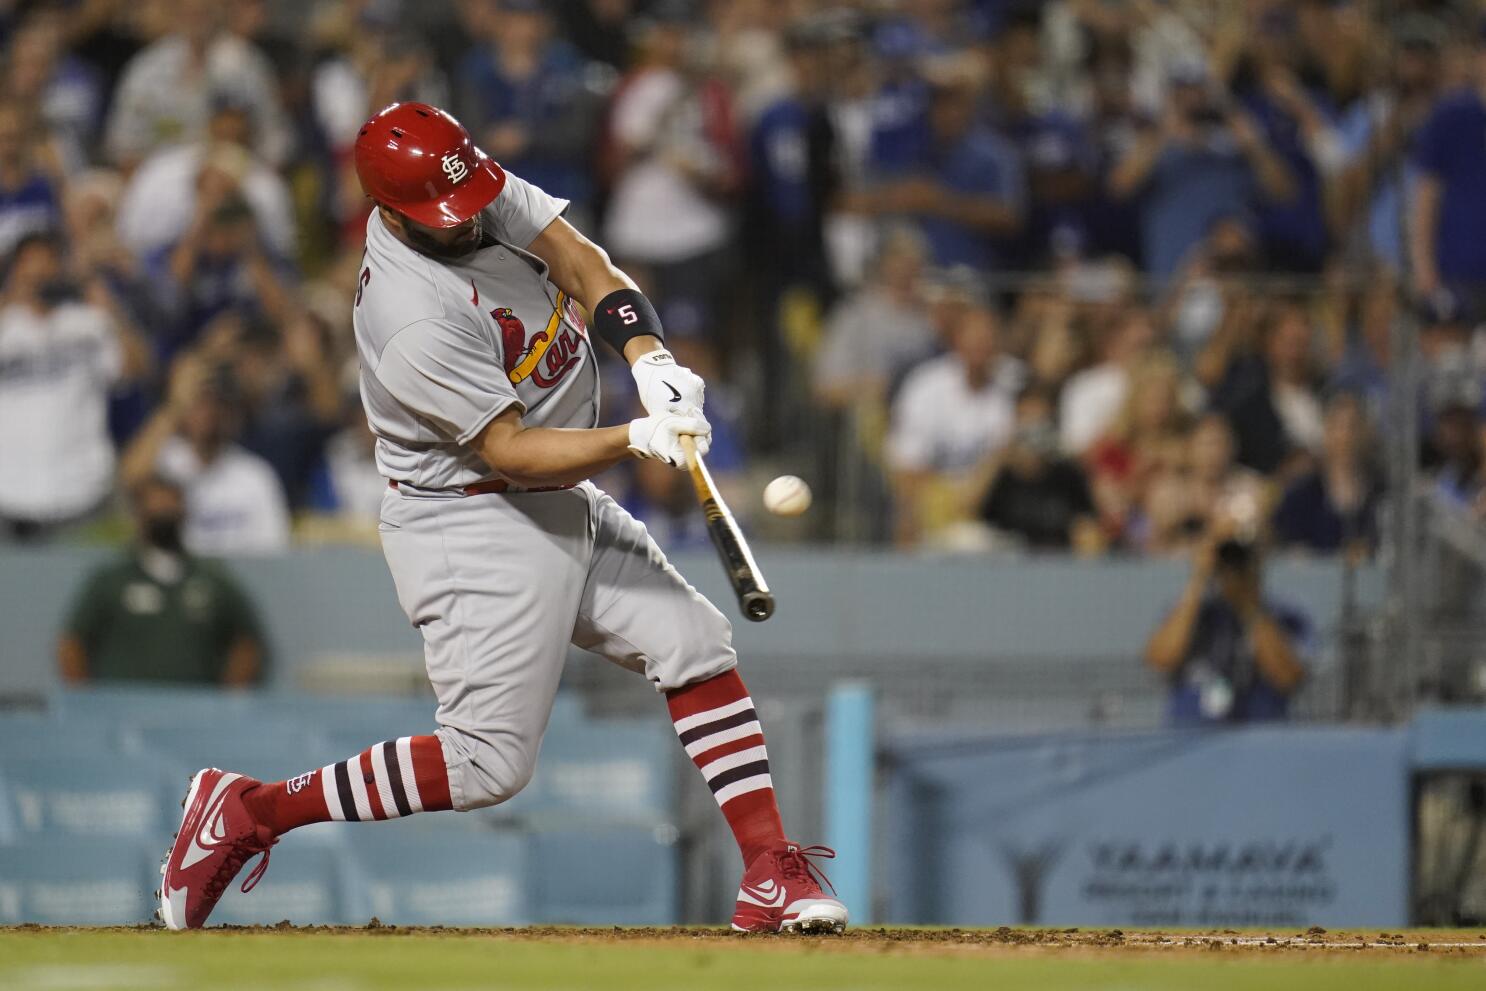 Dodgers news: Albert Pujols has driven in a run in 4 straight